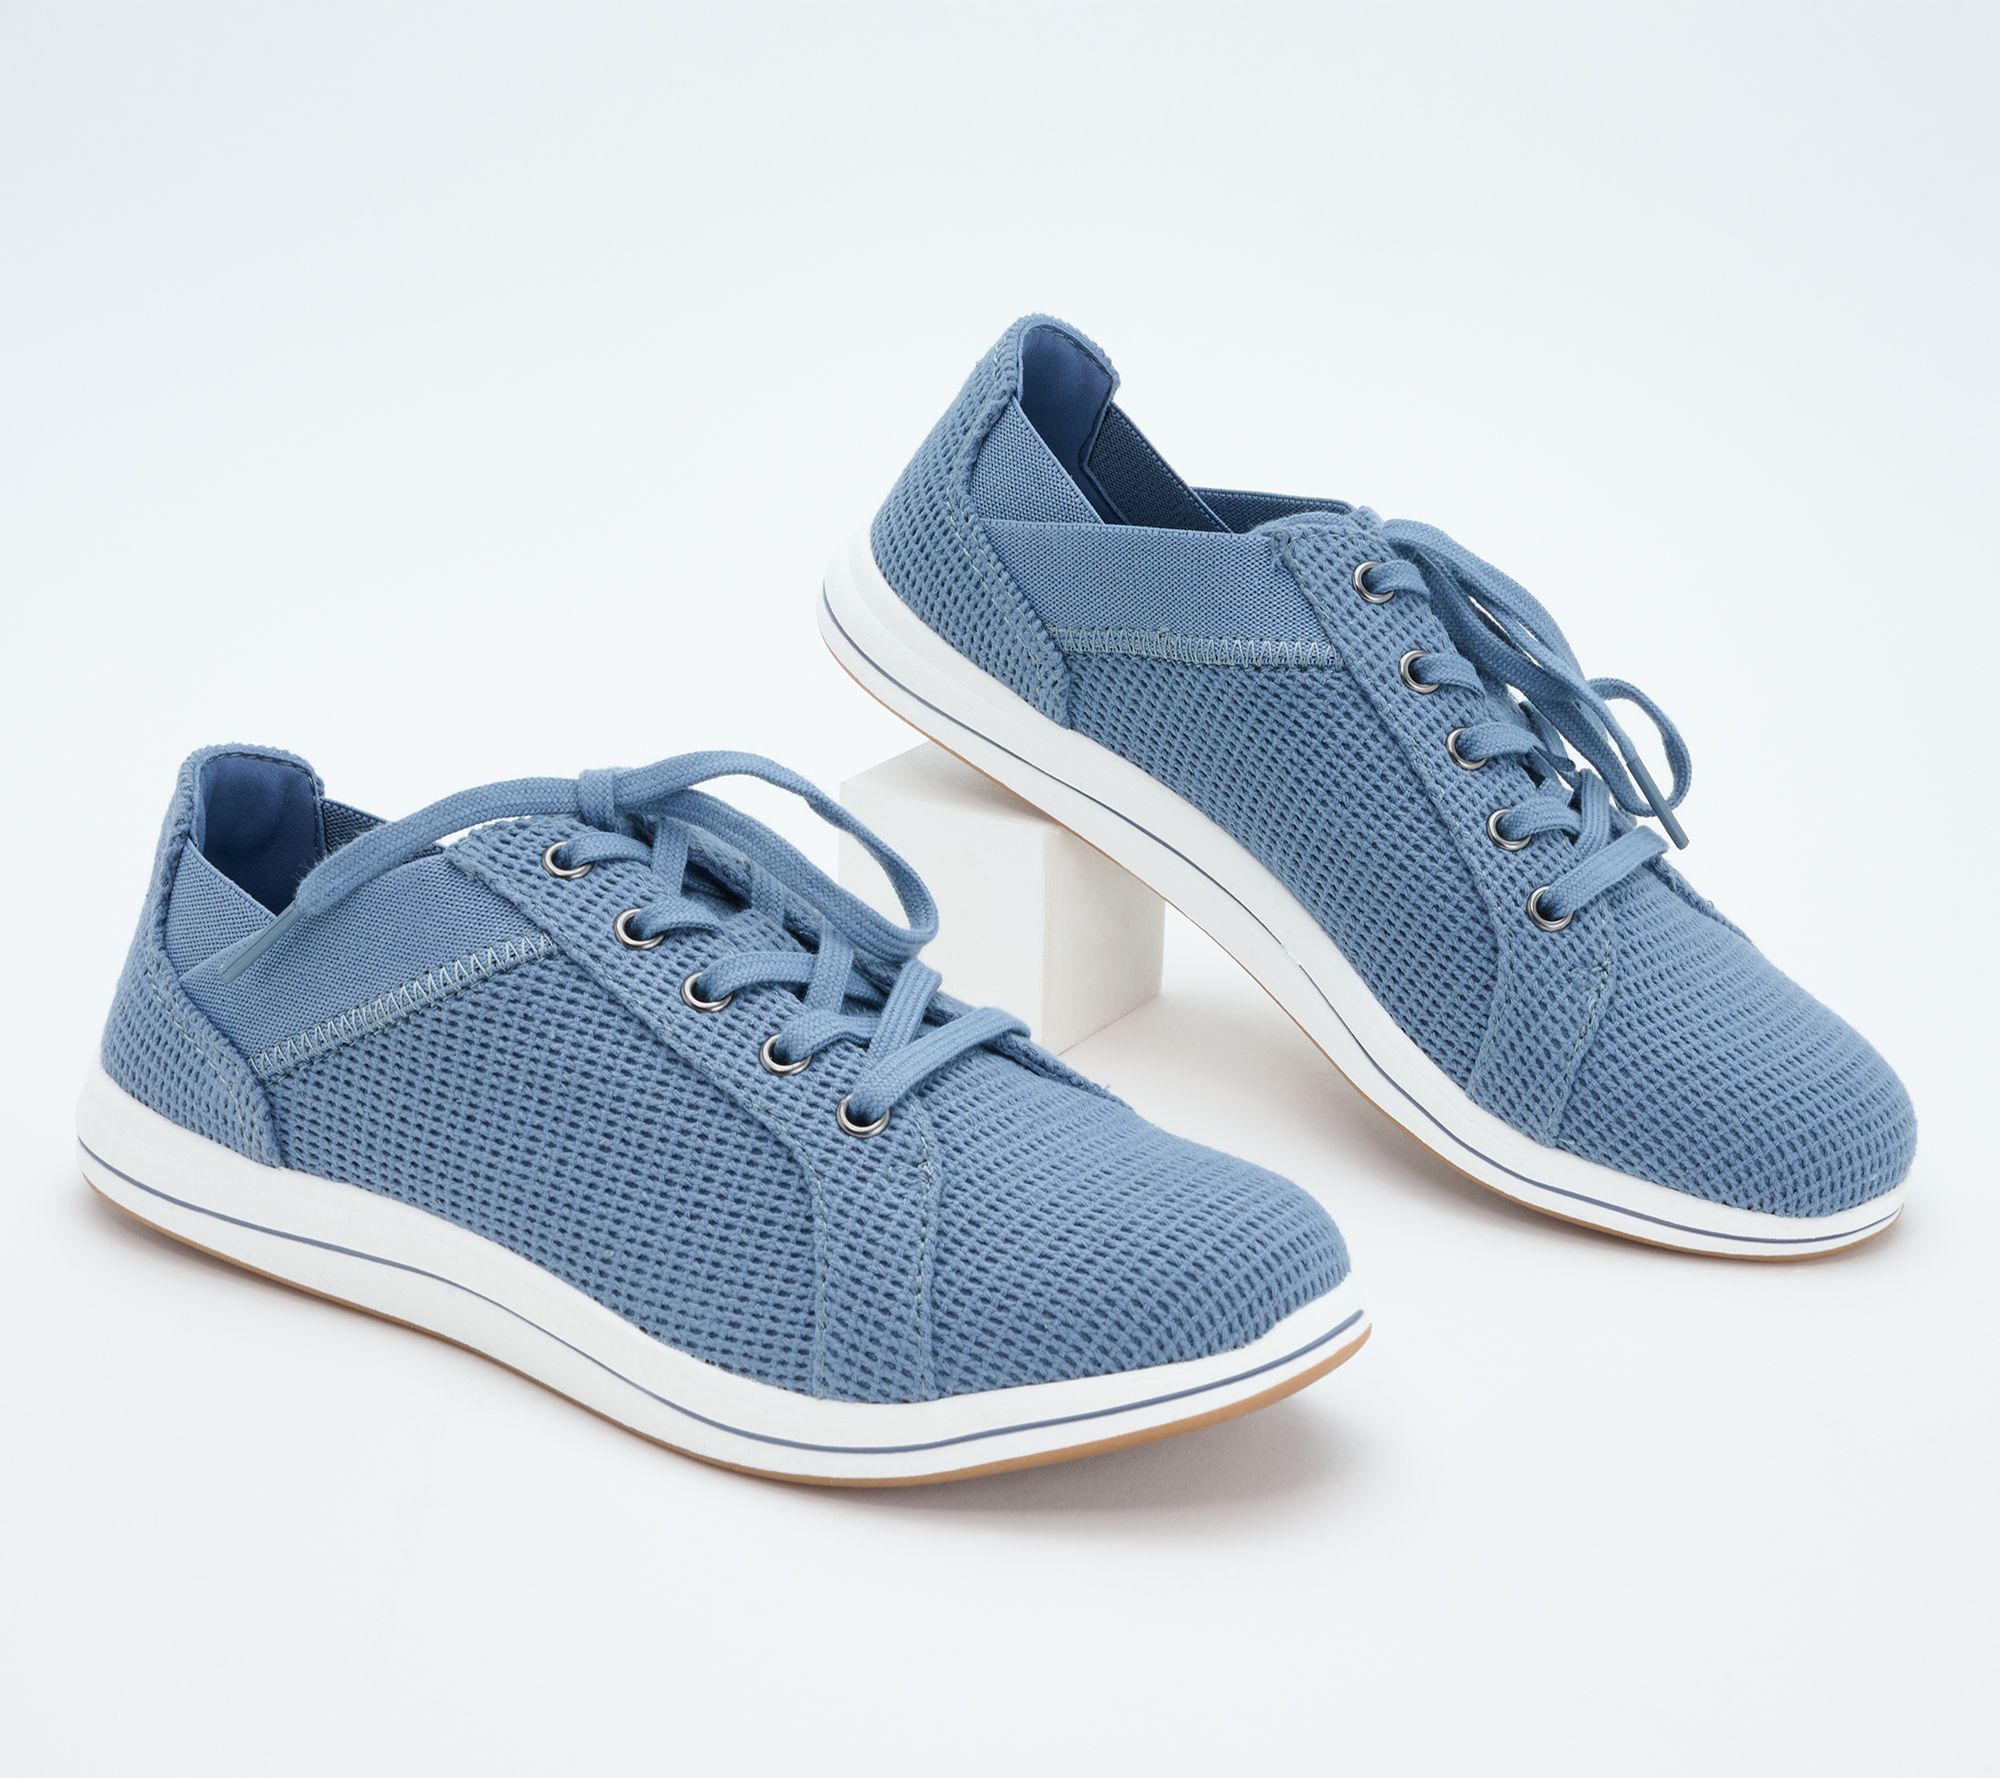 kom videre forbruge instans Clarks Cloudsteppers Crochet Casual Sneakers - Breeze Sky Lace - QVC.com